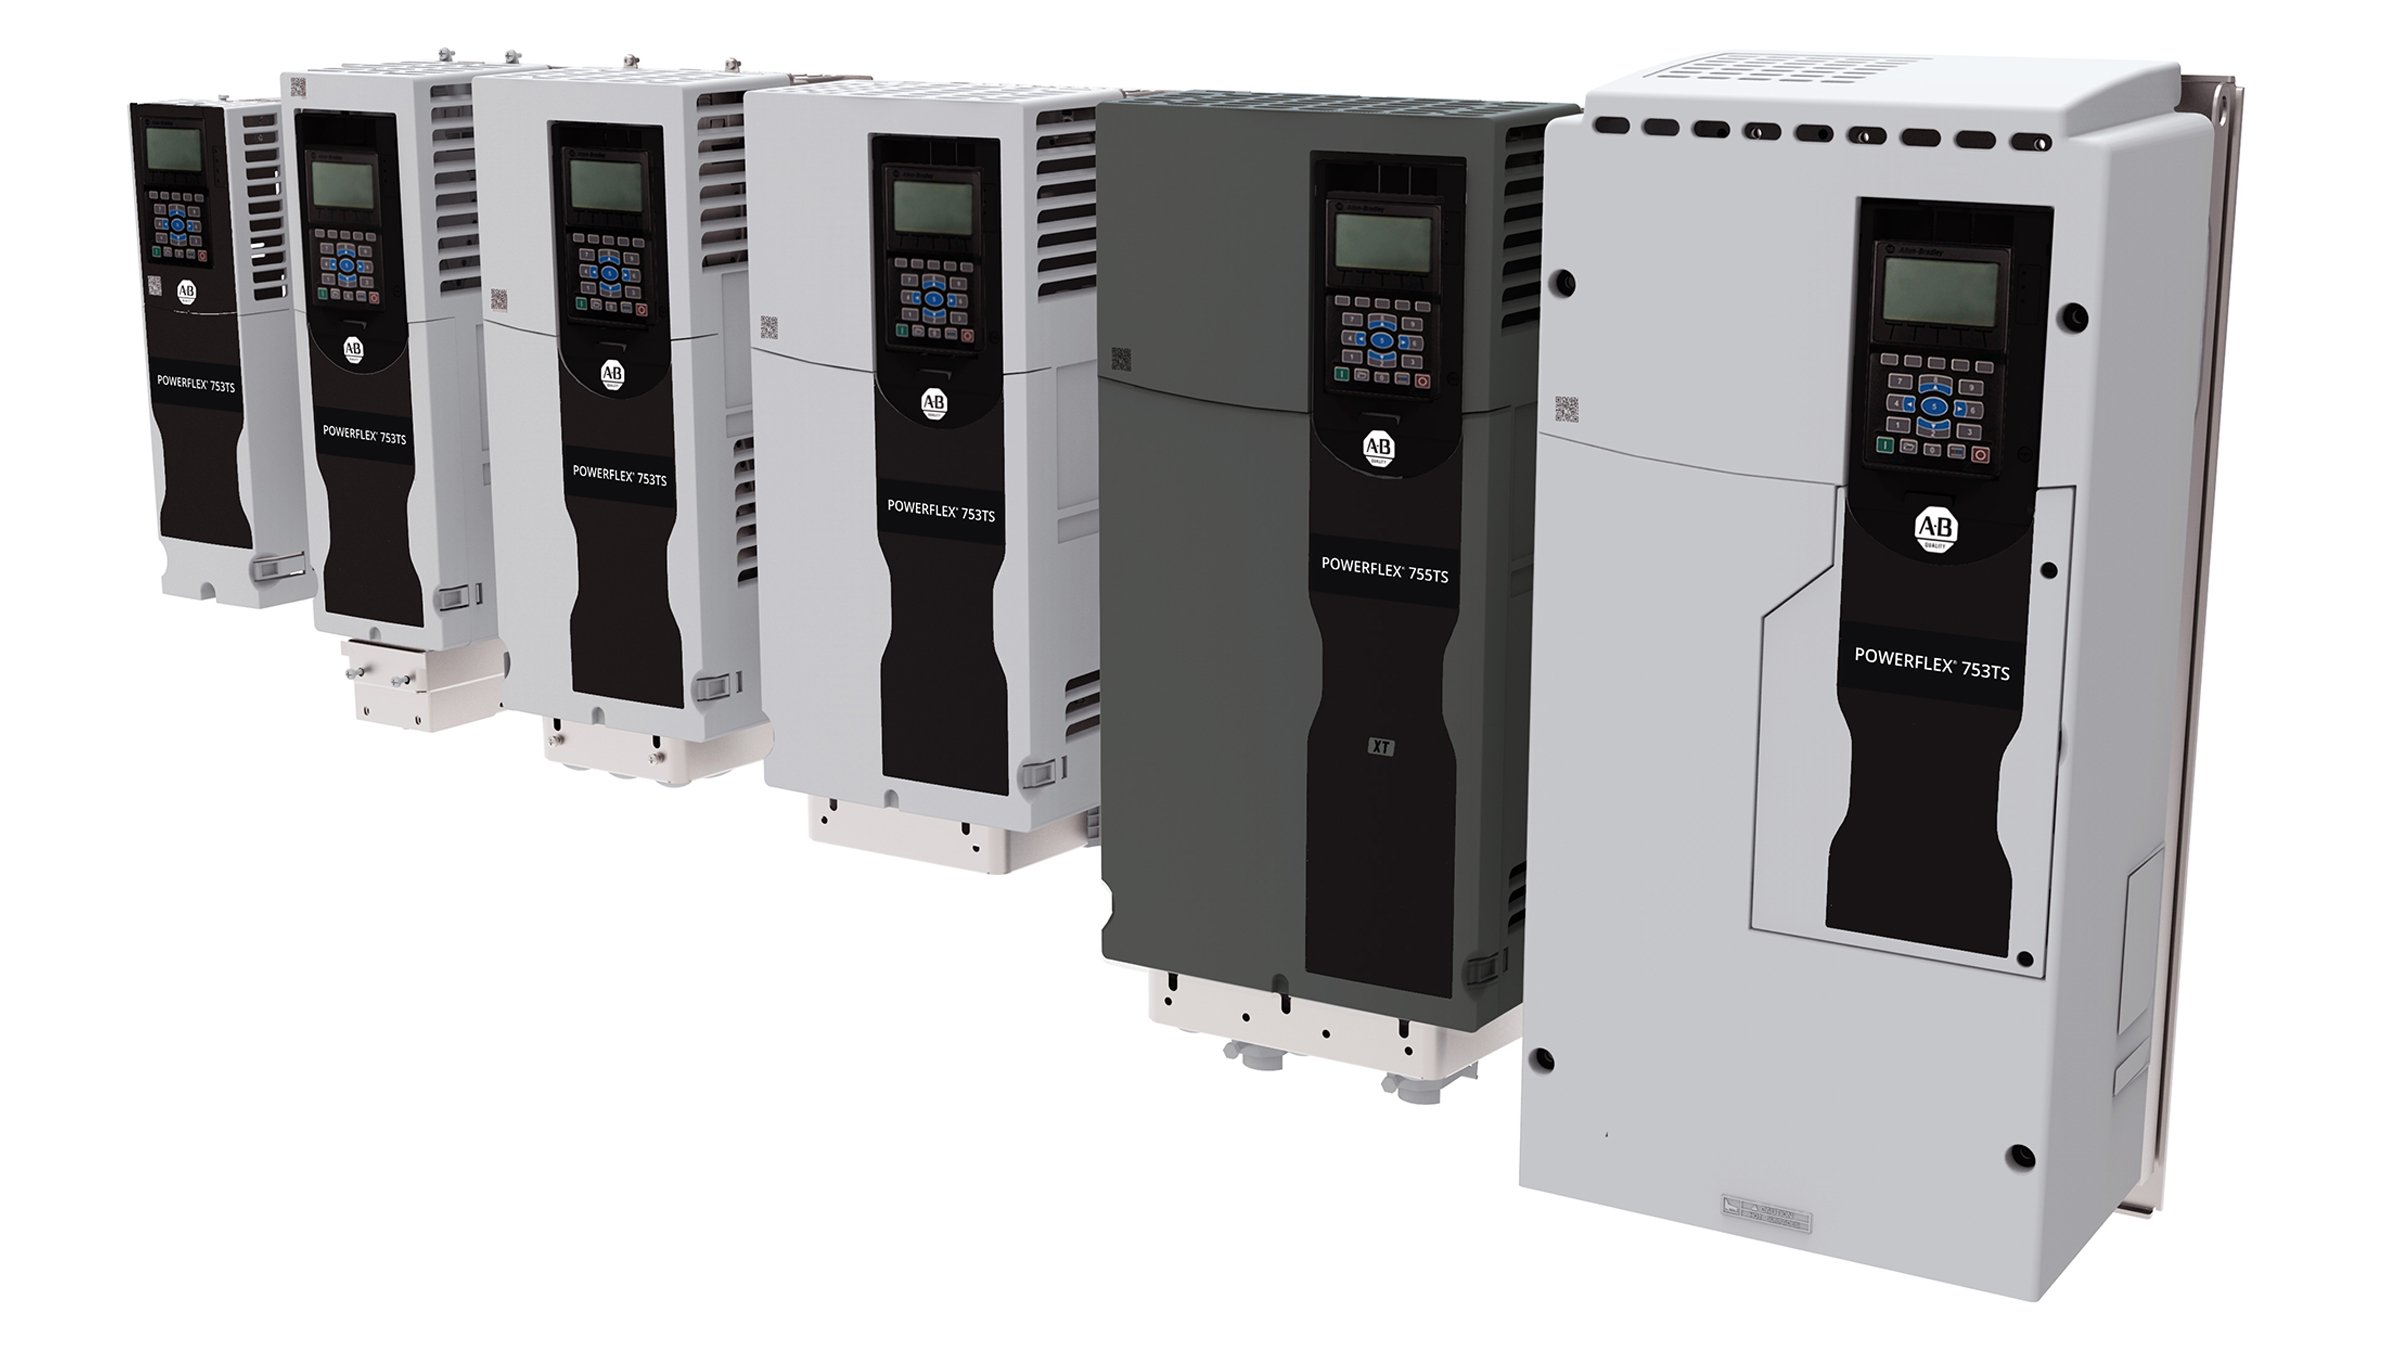 Group of six PowerFlex 755TS drives in a horizontal format. One is dark grey and five are light grey. 